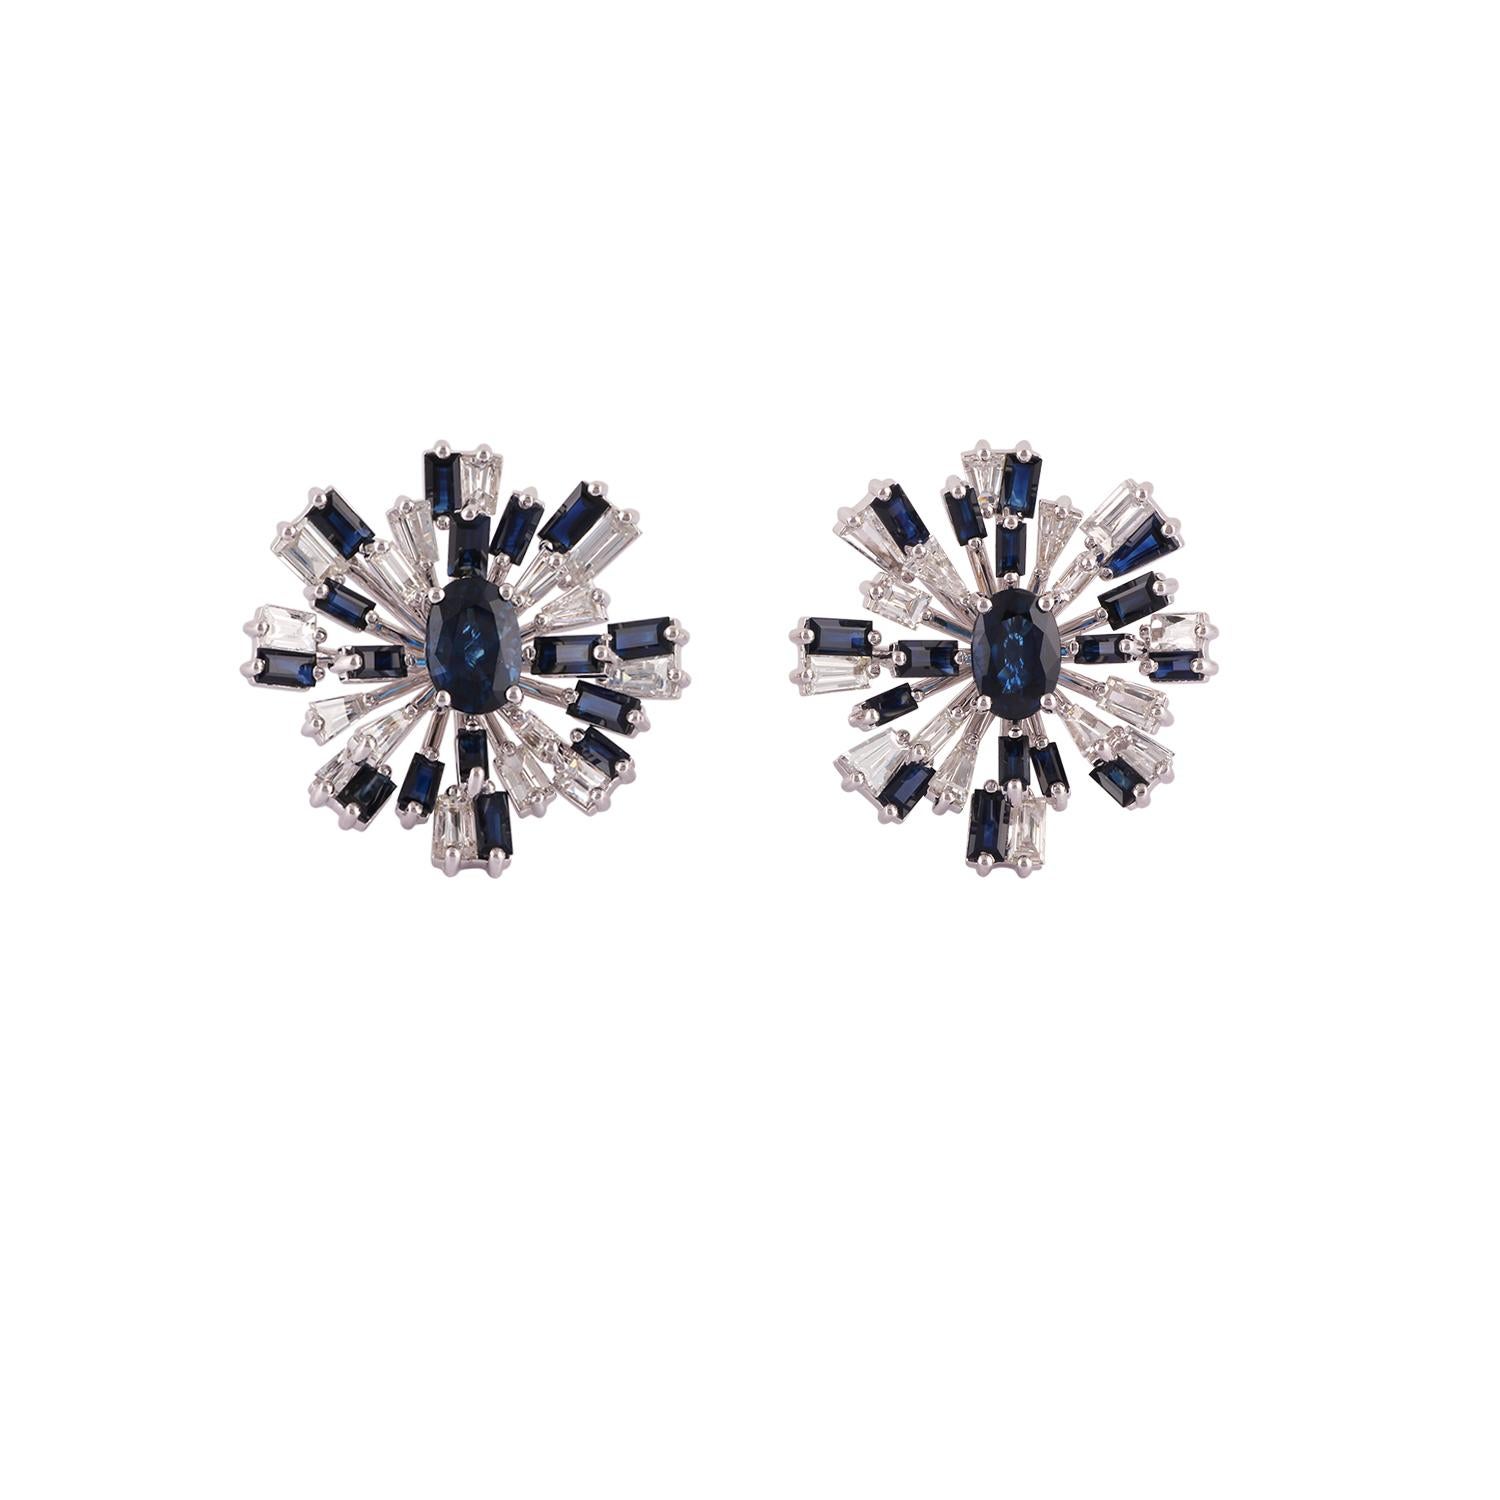 Its an elegant & modern style blue sapphire & diamond earrings studded in 18k white gold features 34 pieces of blue sapphire weight 5.33 carat with 32 pieces of baguette shaped diamonds weight 2.14 carat, this entire earring pair is made of 18k